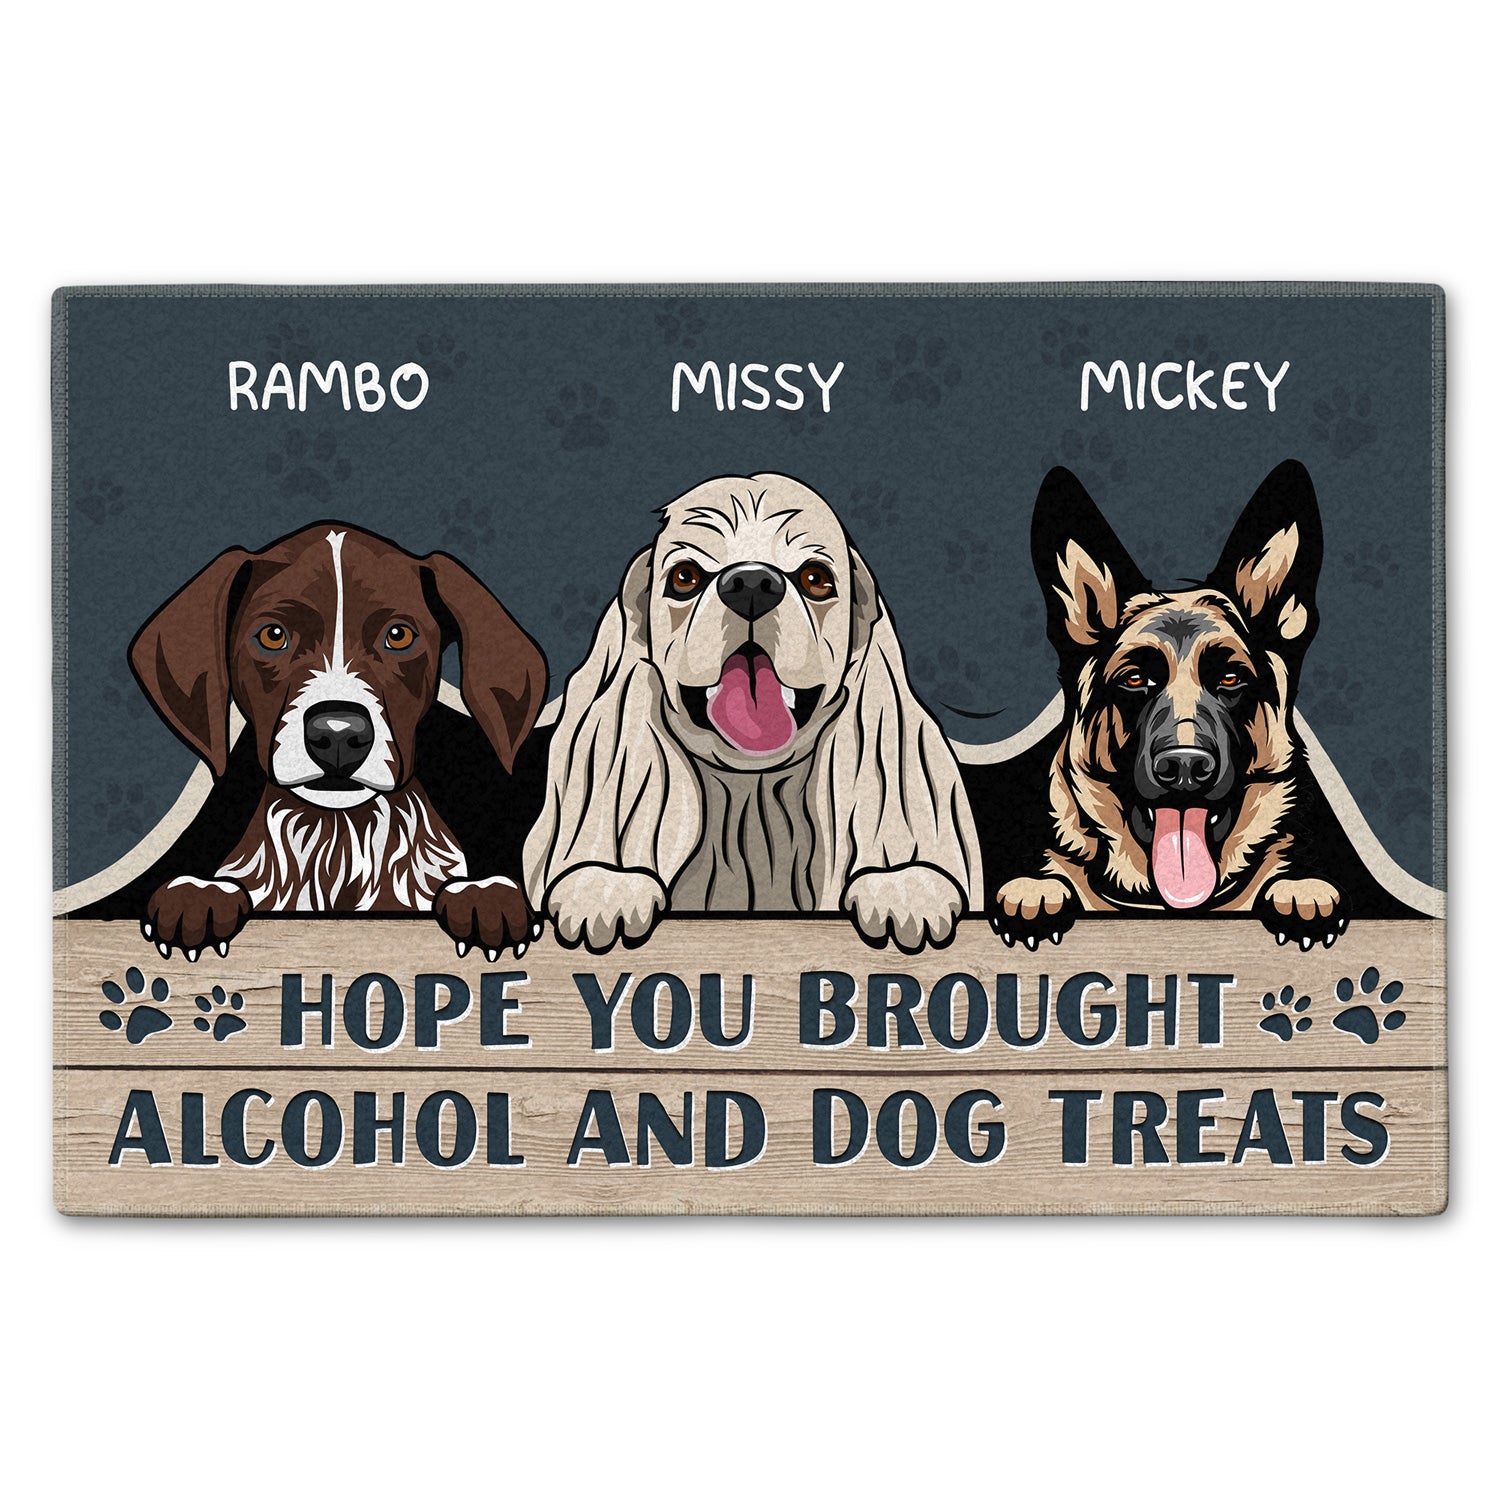 Hope You Brought Alcohol And Dog Treats Cat Treats - Personalized Custom Doormat